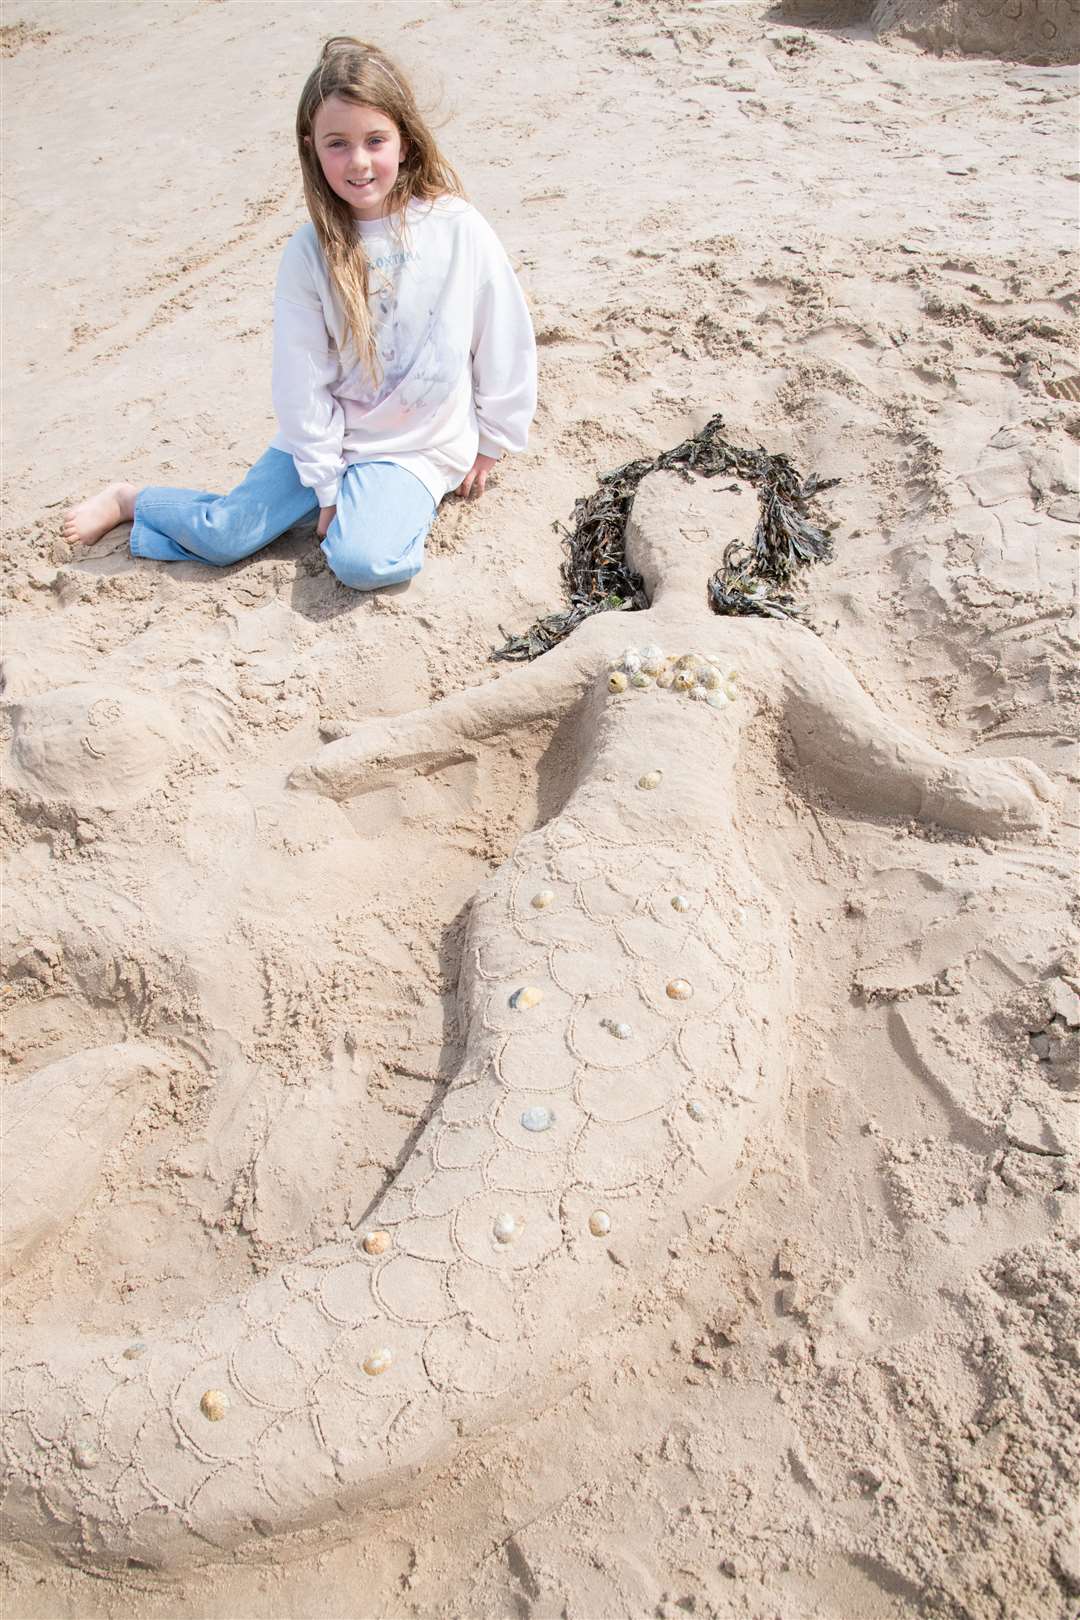 Alice May with her mermaid sculpture at the Sandcastle Competition. Picture: Daniel Forsyth